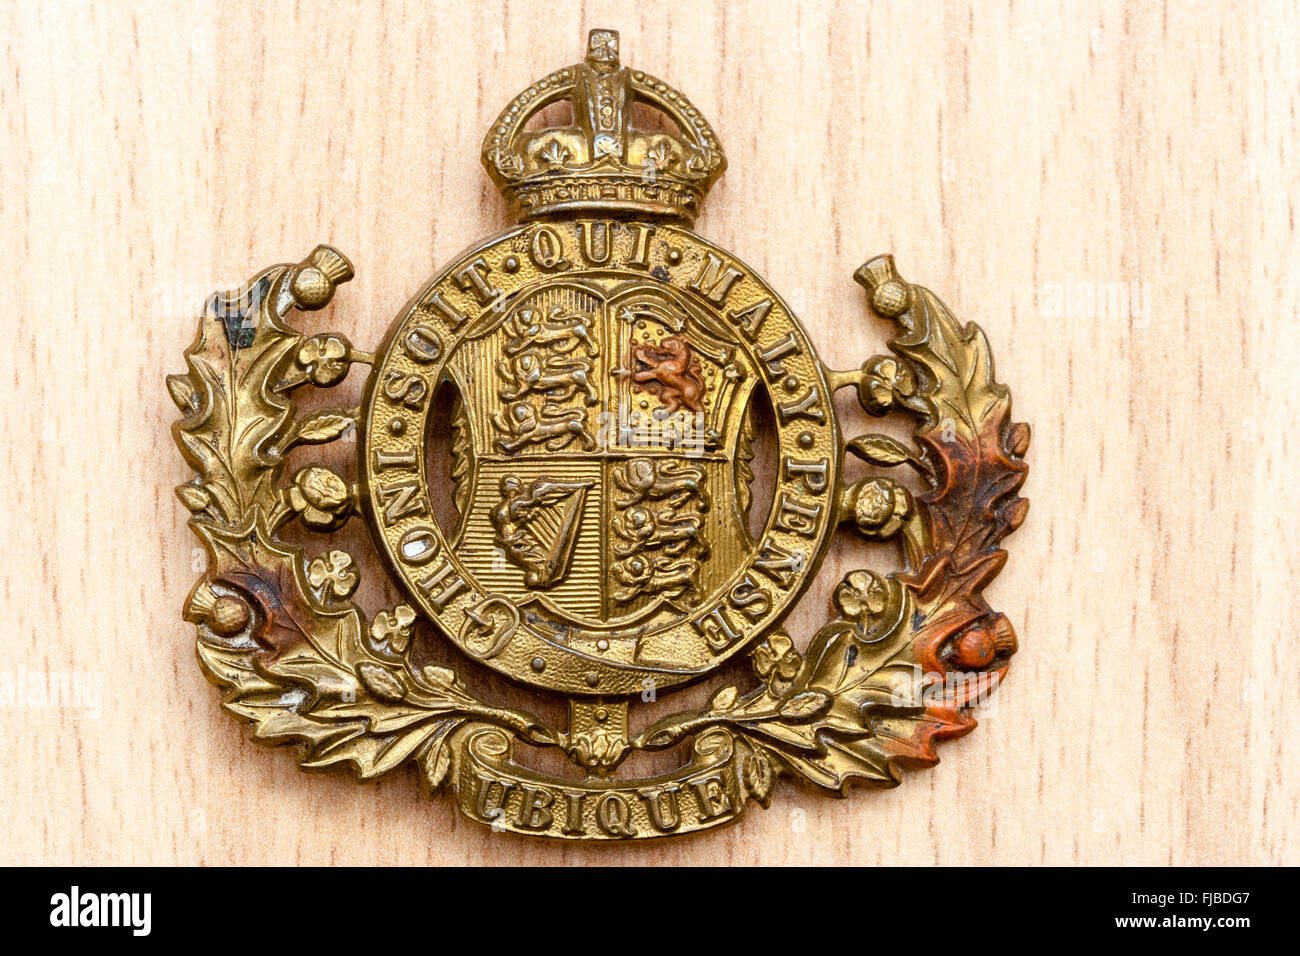 Royal Artillery Ubique cap Badge from the first world war against wooden grain background. Badge features motto 'honi soit qui mal y pense'. Stock Photo